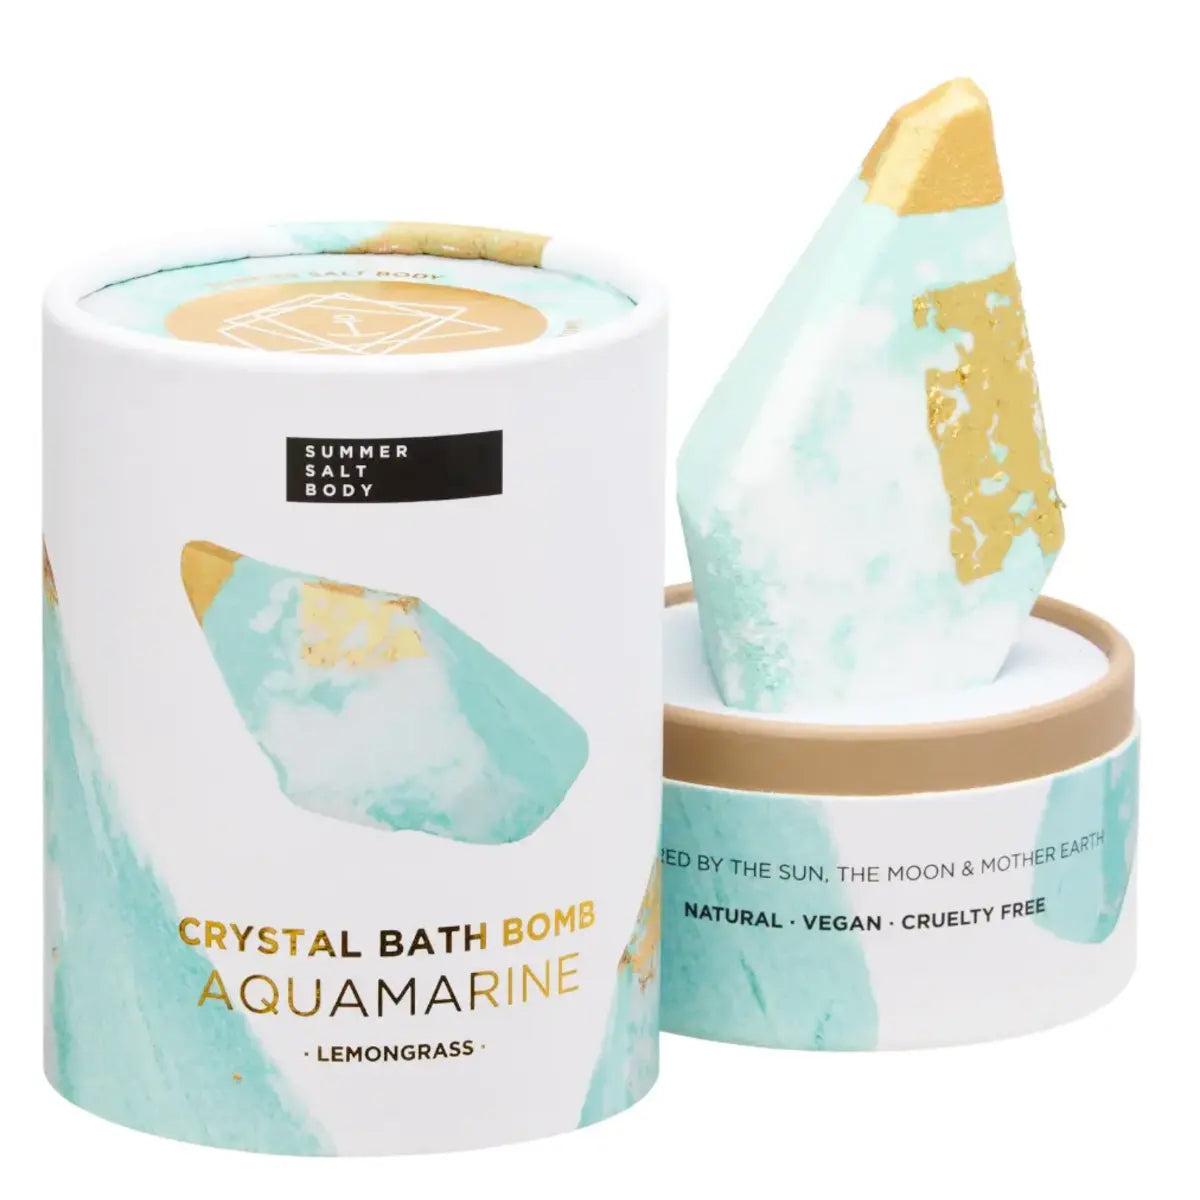 Transform your bath routine with the mesmerizing Aquamarine Crystal Bath Bomb from Summer Salt Body. Immerse yourself in a tranquil oasis of aromatherapy while admiring the soothing hues of Aquamarine.